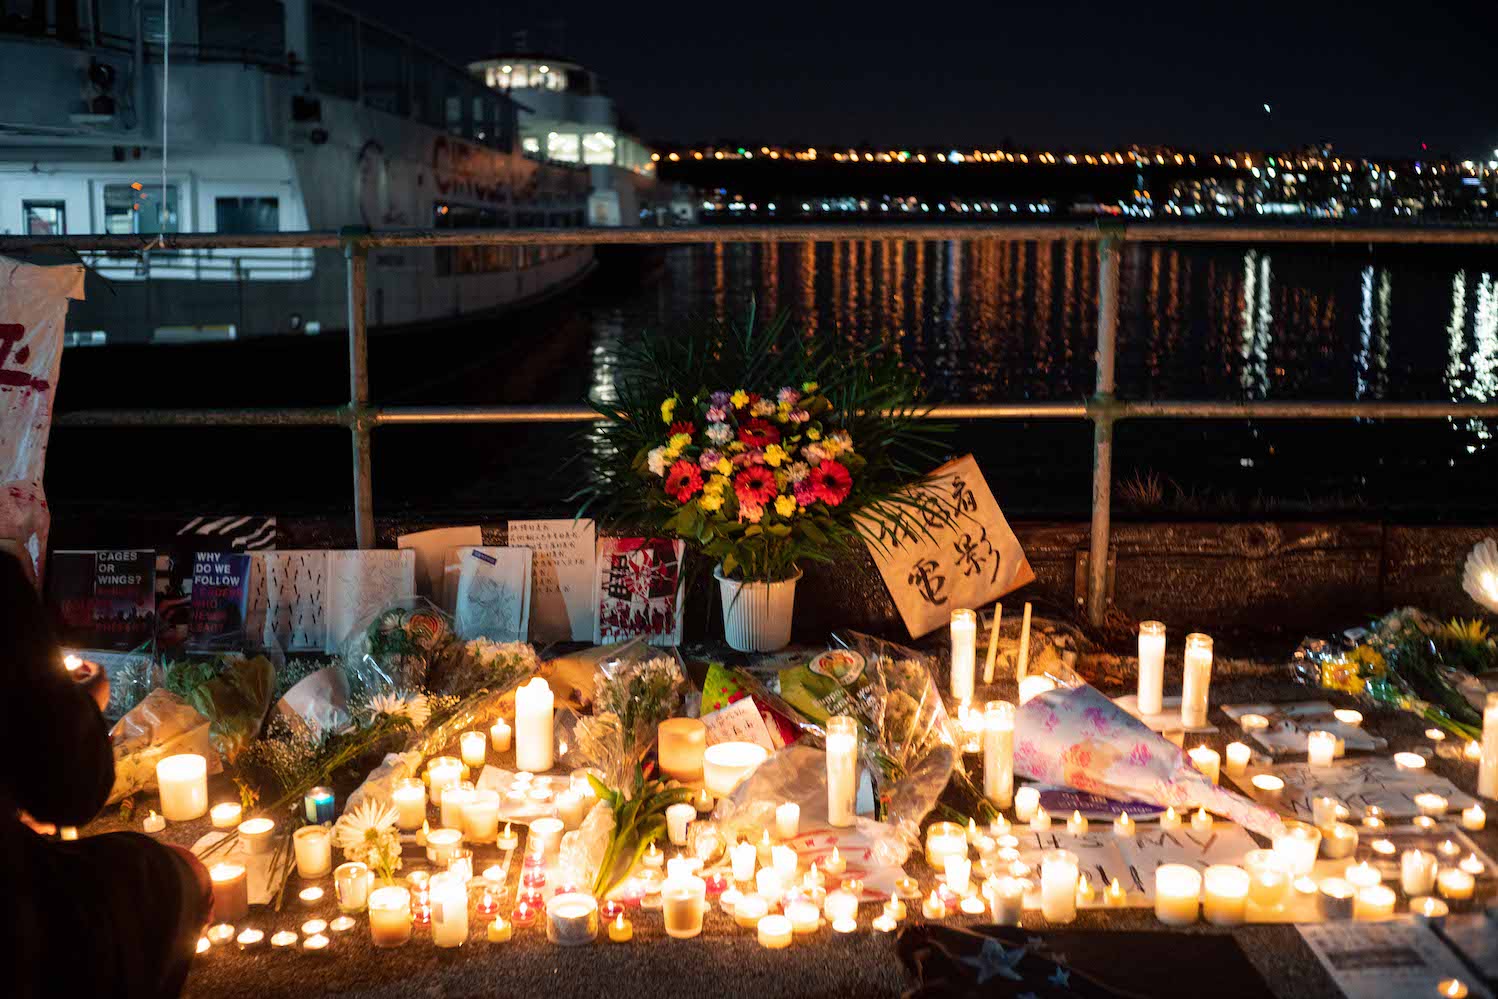 An arrangement of flowers and candles laid on the ground with commemorative texts in Chinese written on posters and papers around the candles.